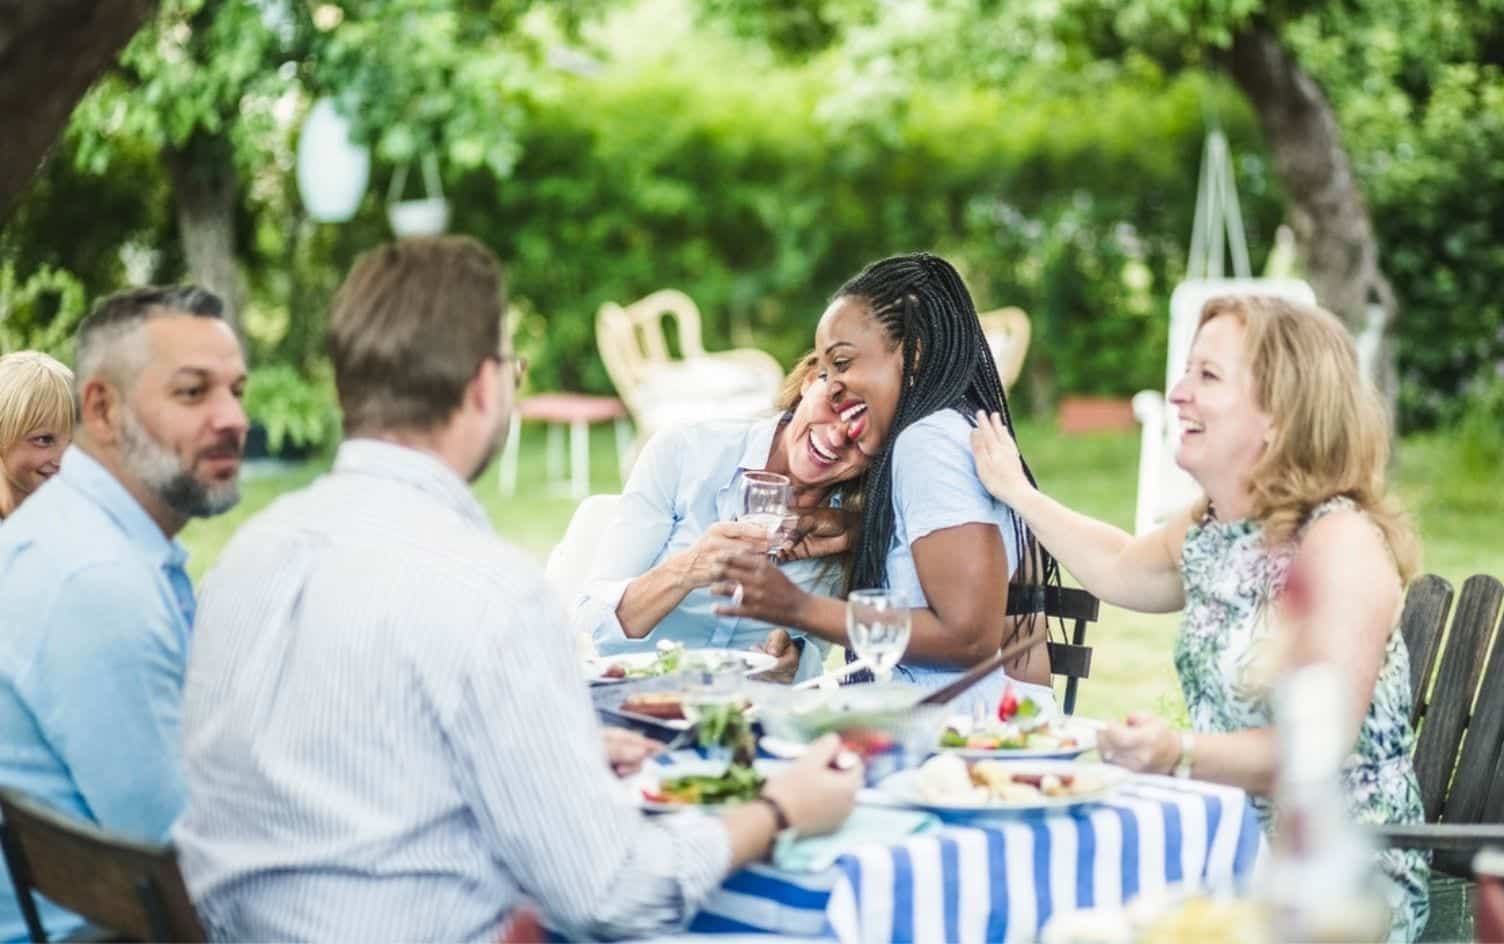 Dietitian-Approved Tips to Maintain Weight Loss During Summer Party Season